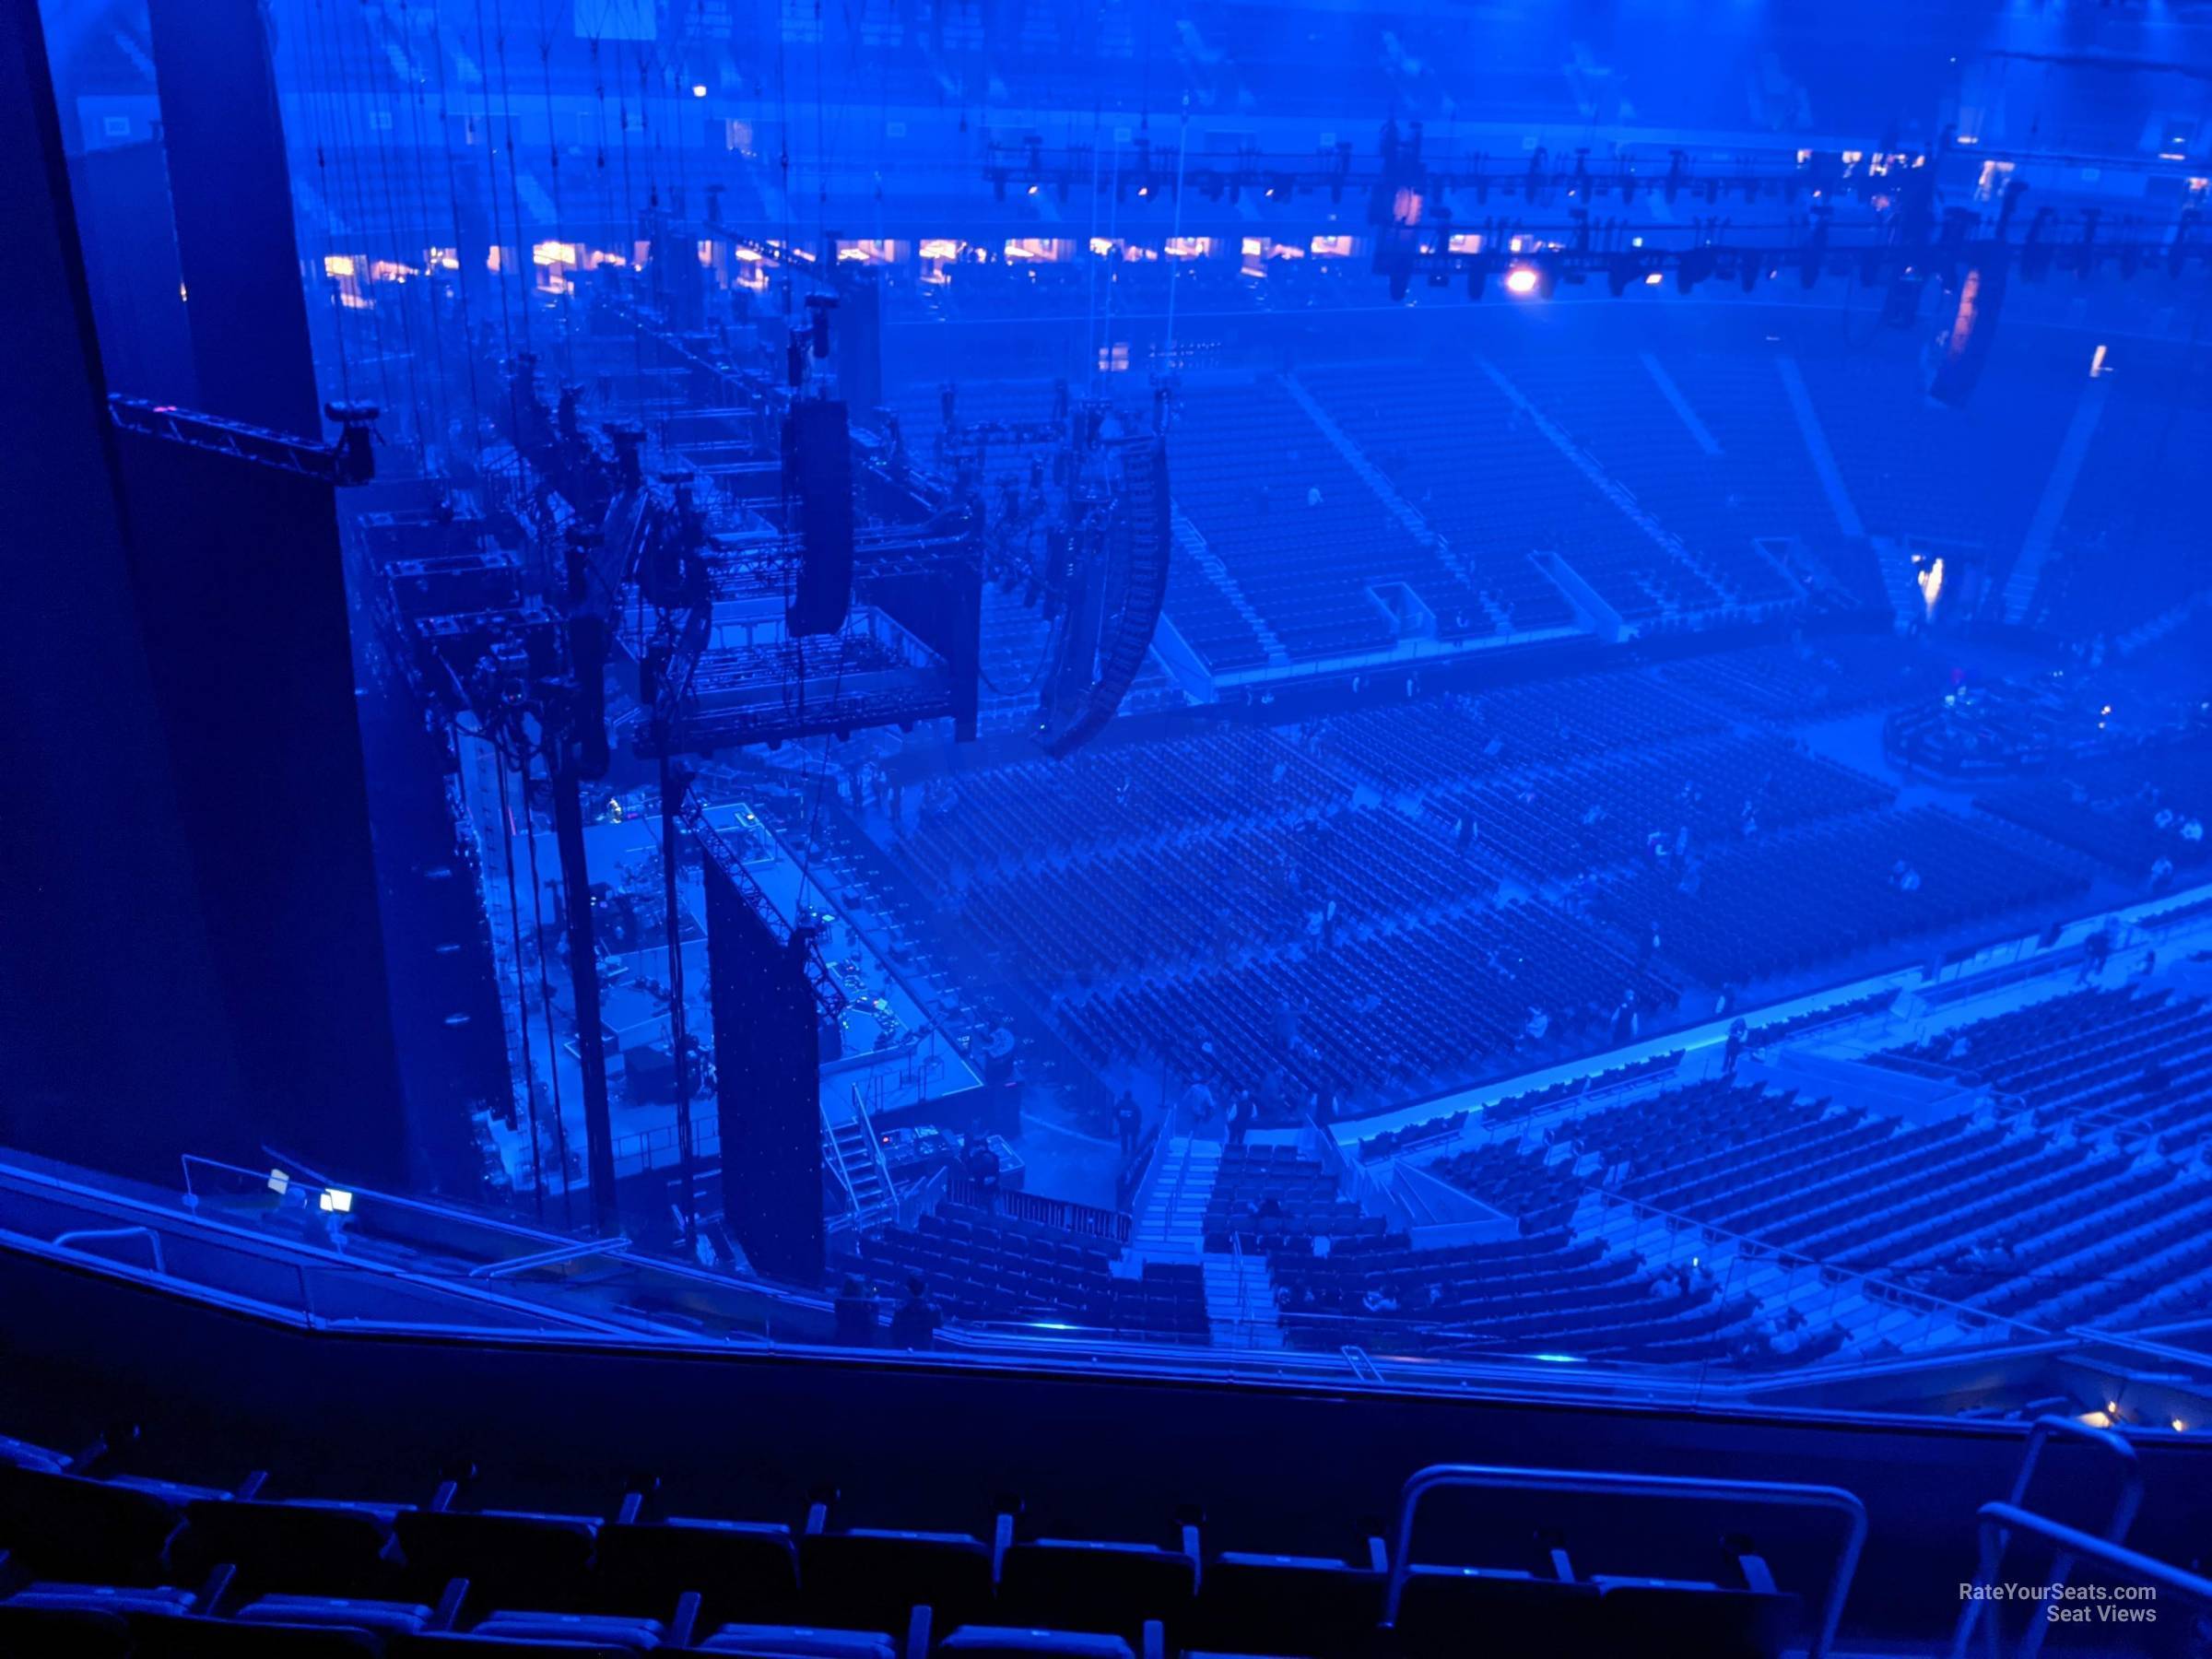 section 325, row 6 seat view  for concert - ubs arena